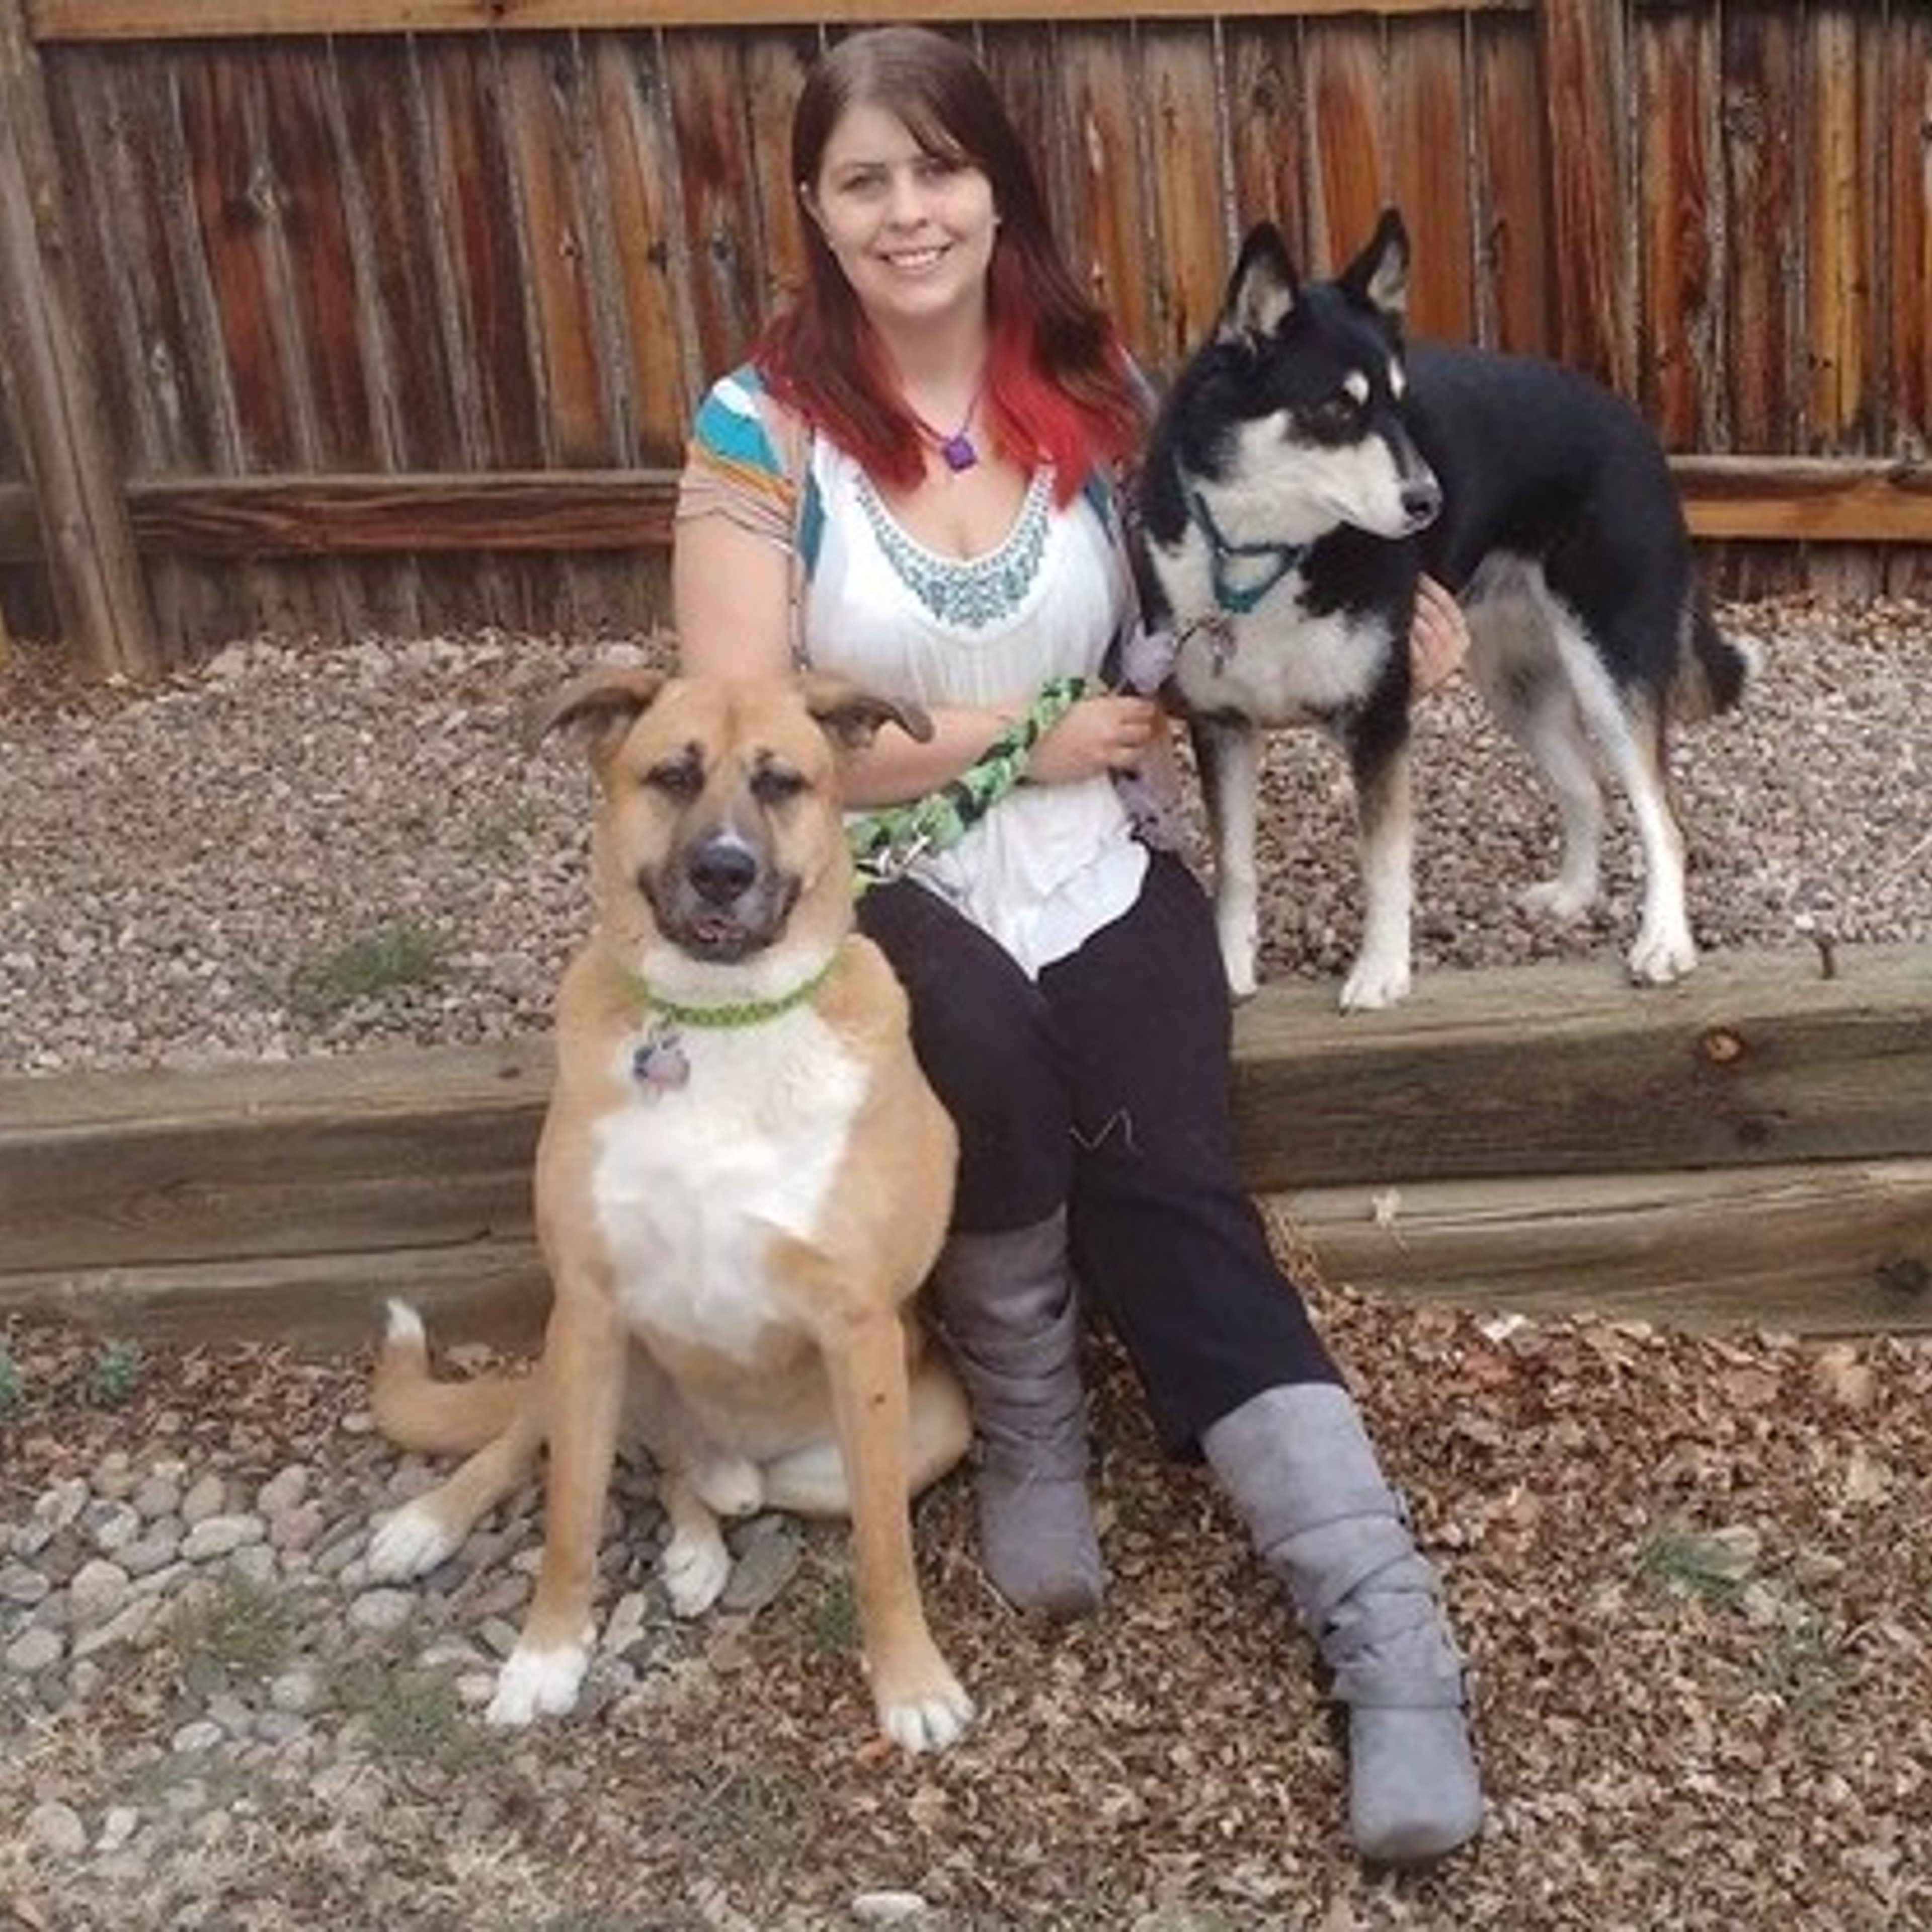 Colorado Springs Certified Positive reinforcement dog trainer offering pet services, turn animal lover with tons of experienc